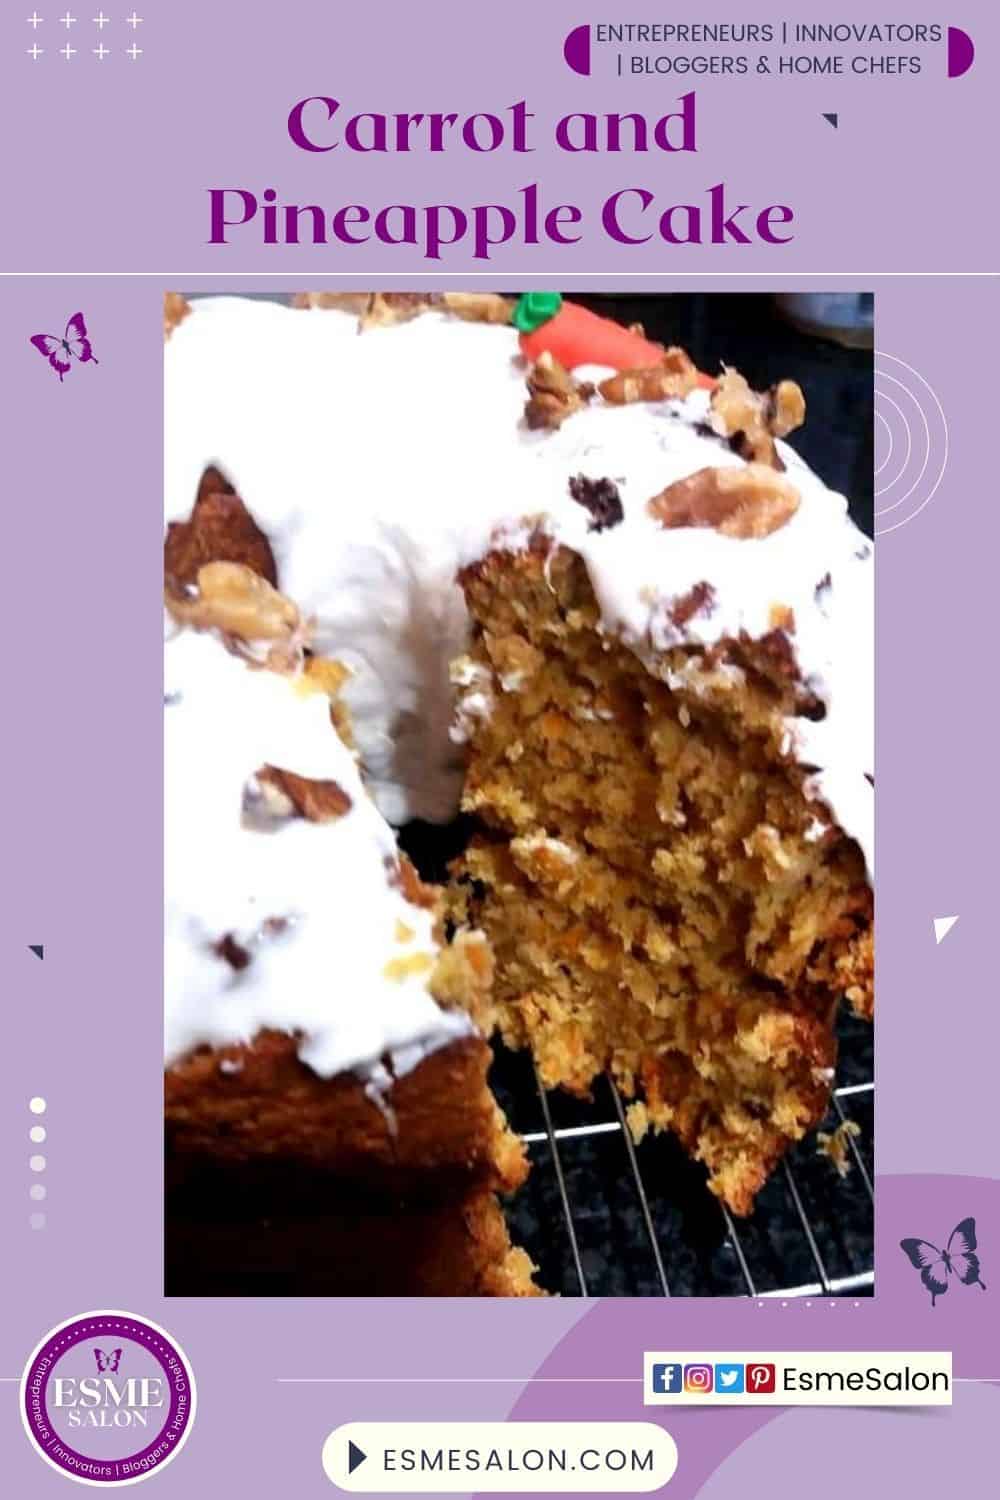 Carrot and Pineapple Cake with cream cheese and nut topping